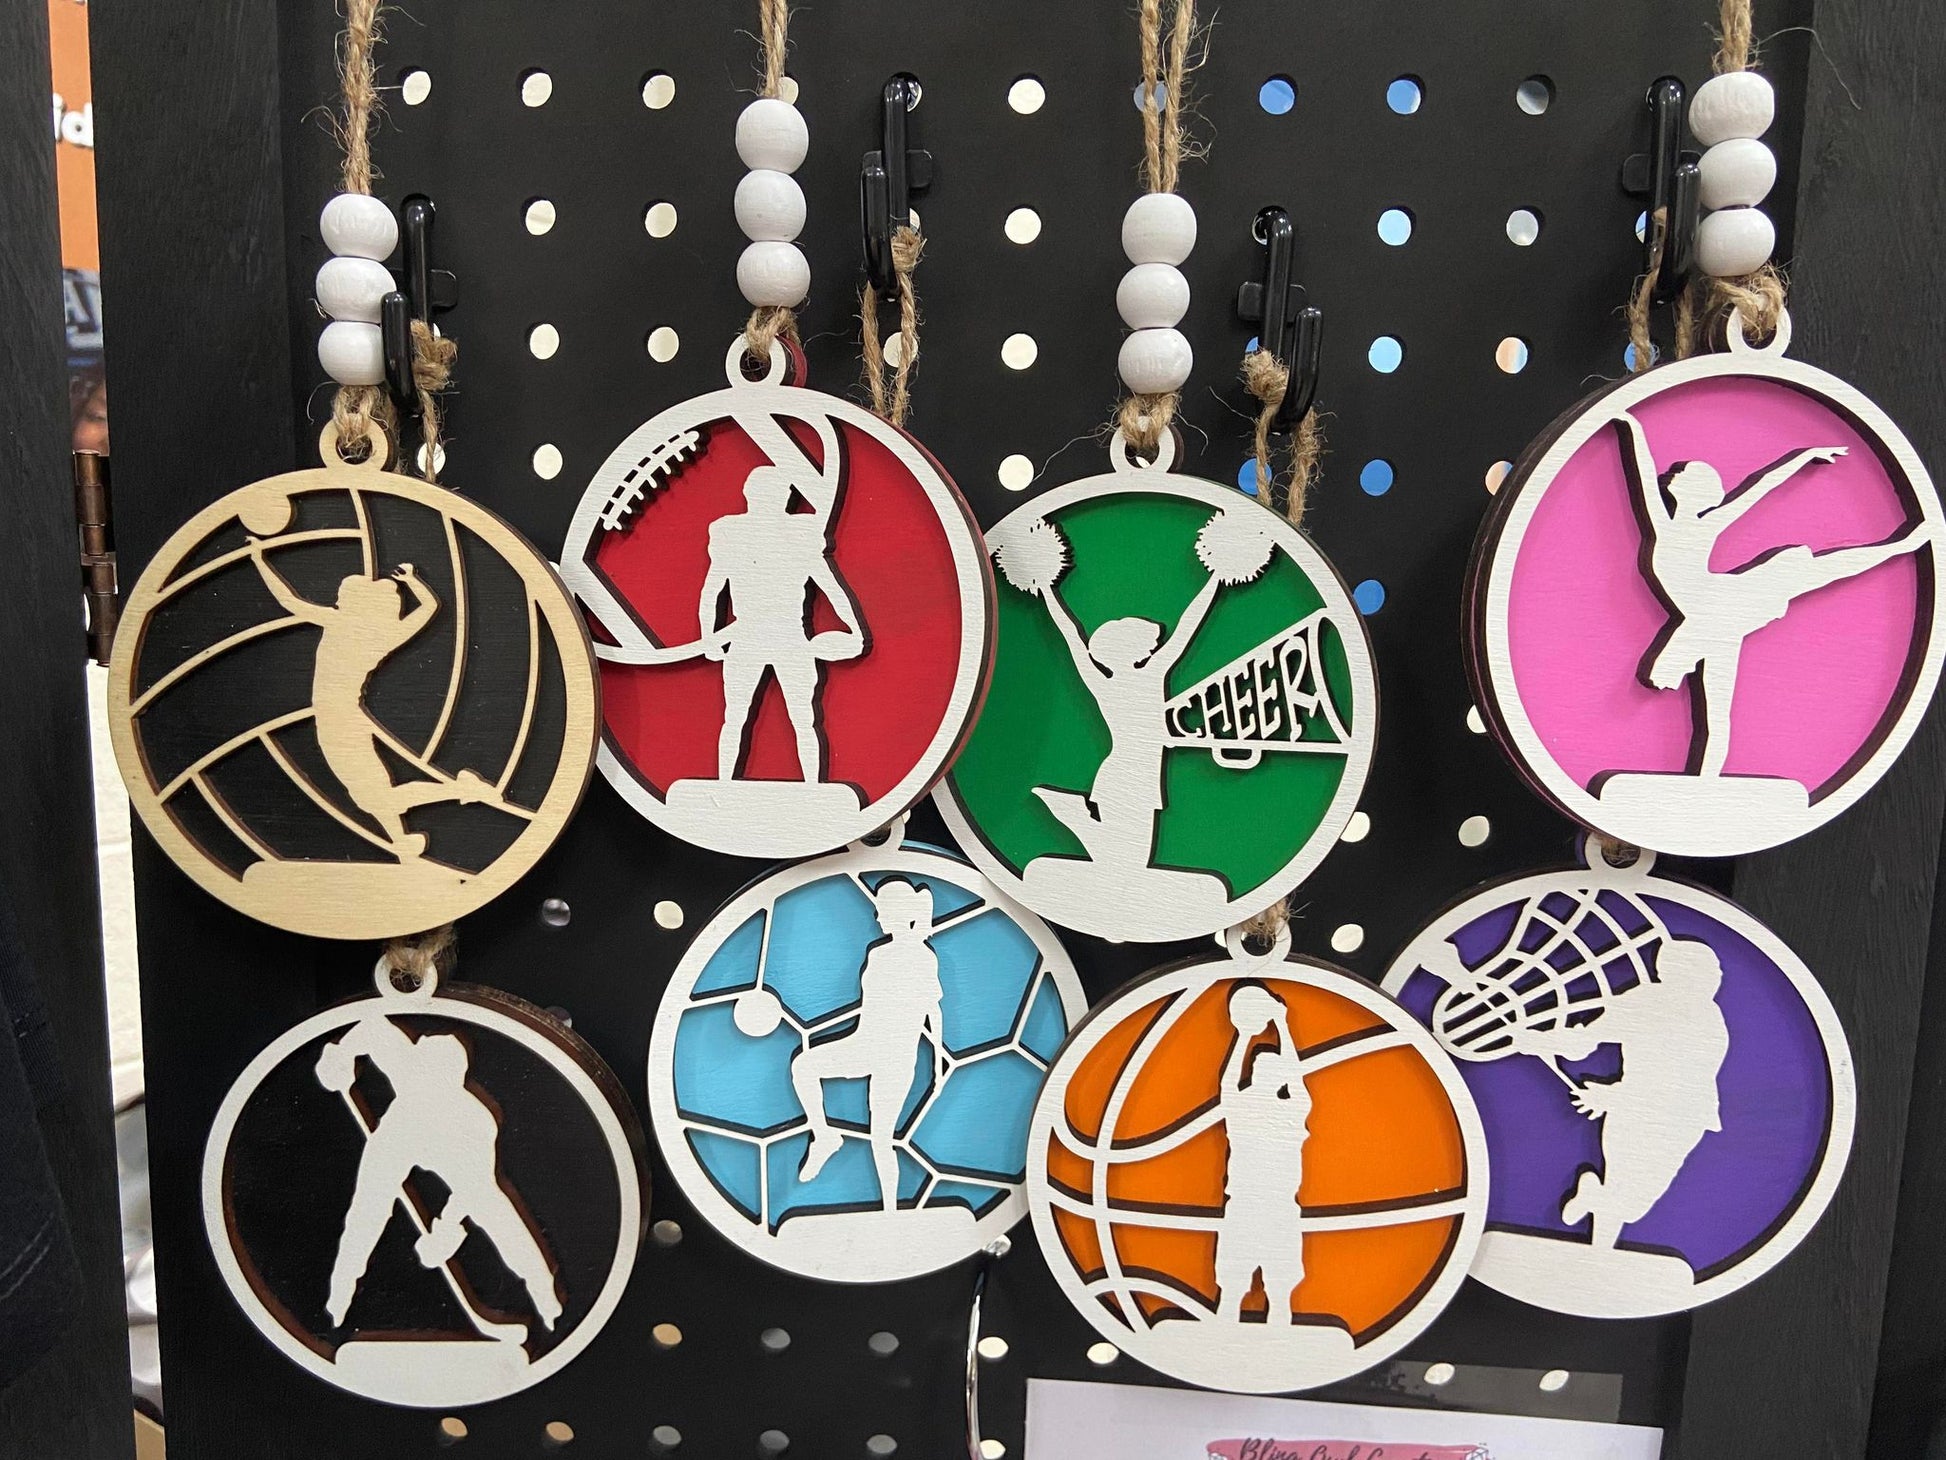 christmas_ornaments cheer_ornaments volleyball_ornaments football_ornaments ballet_ornaments hockey_ornaments 